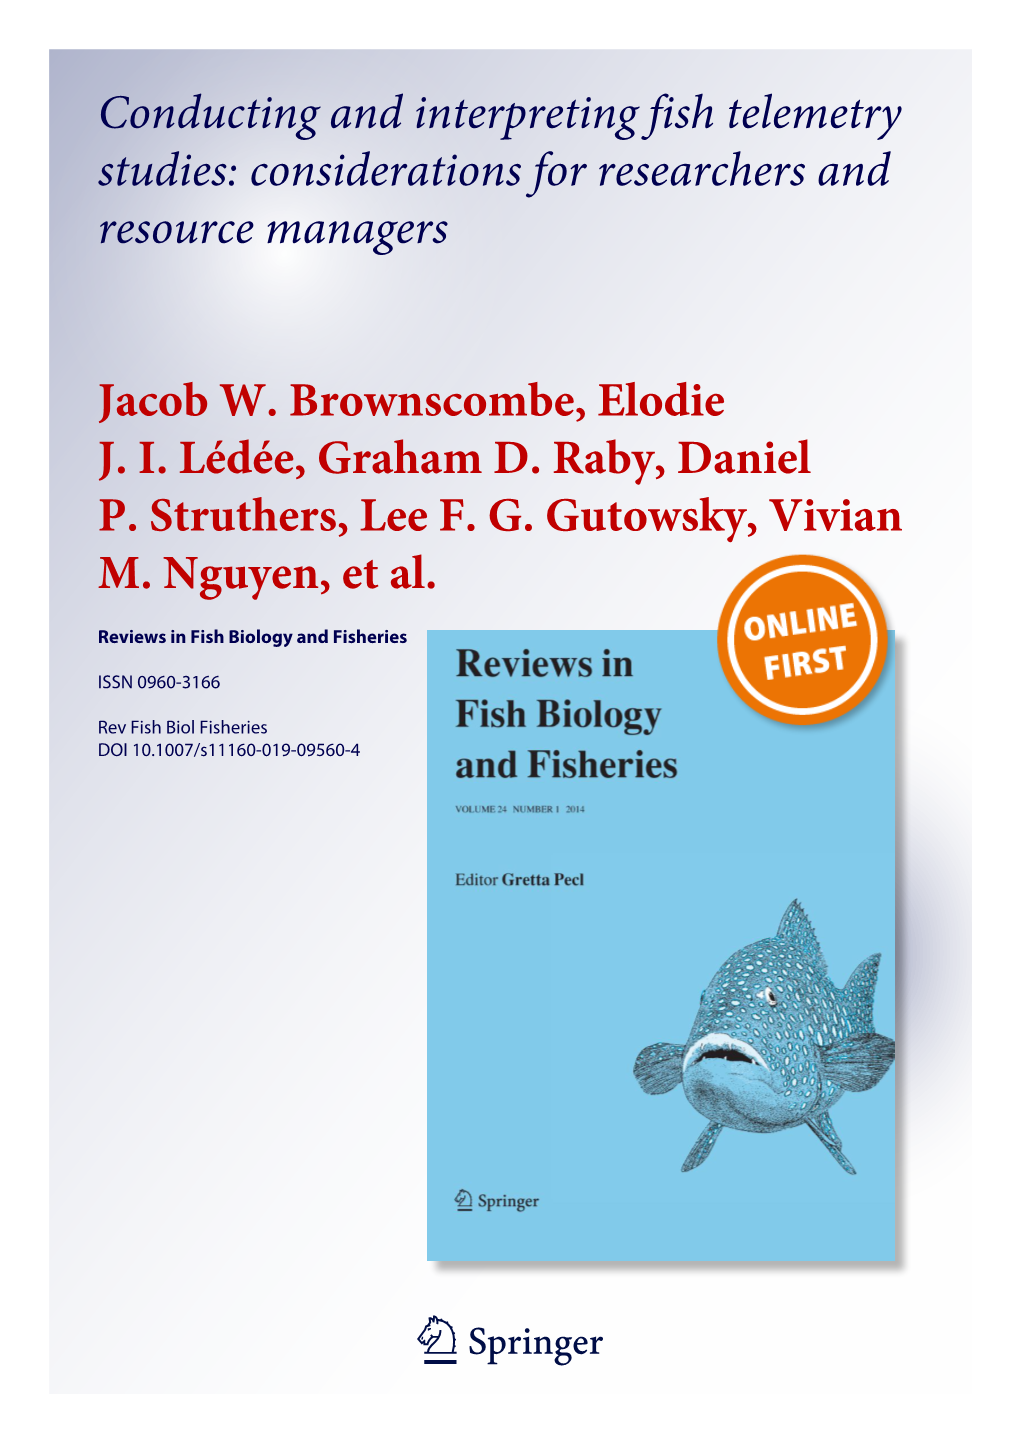 Conducting and Interpreting Fish Telemetry Studies: Considerations for Researchers and Resource Managers